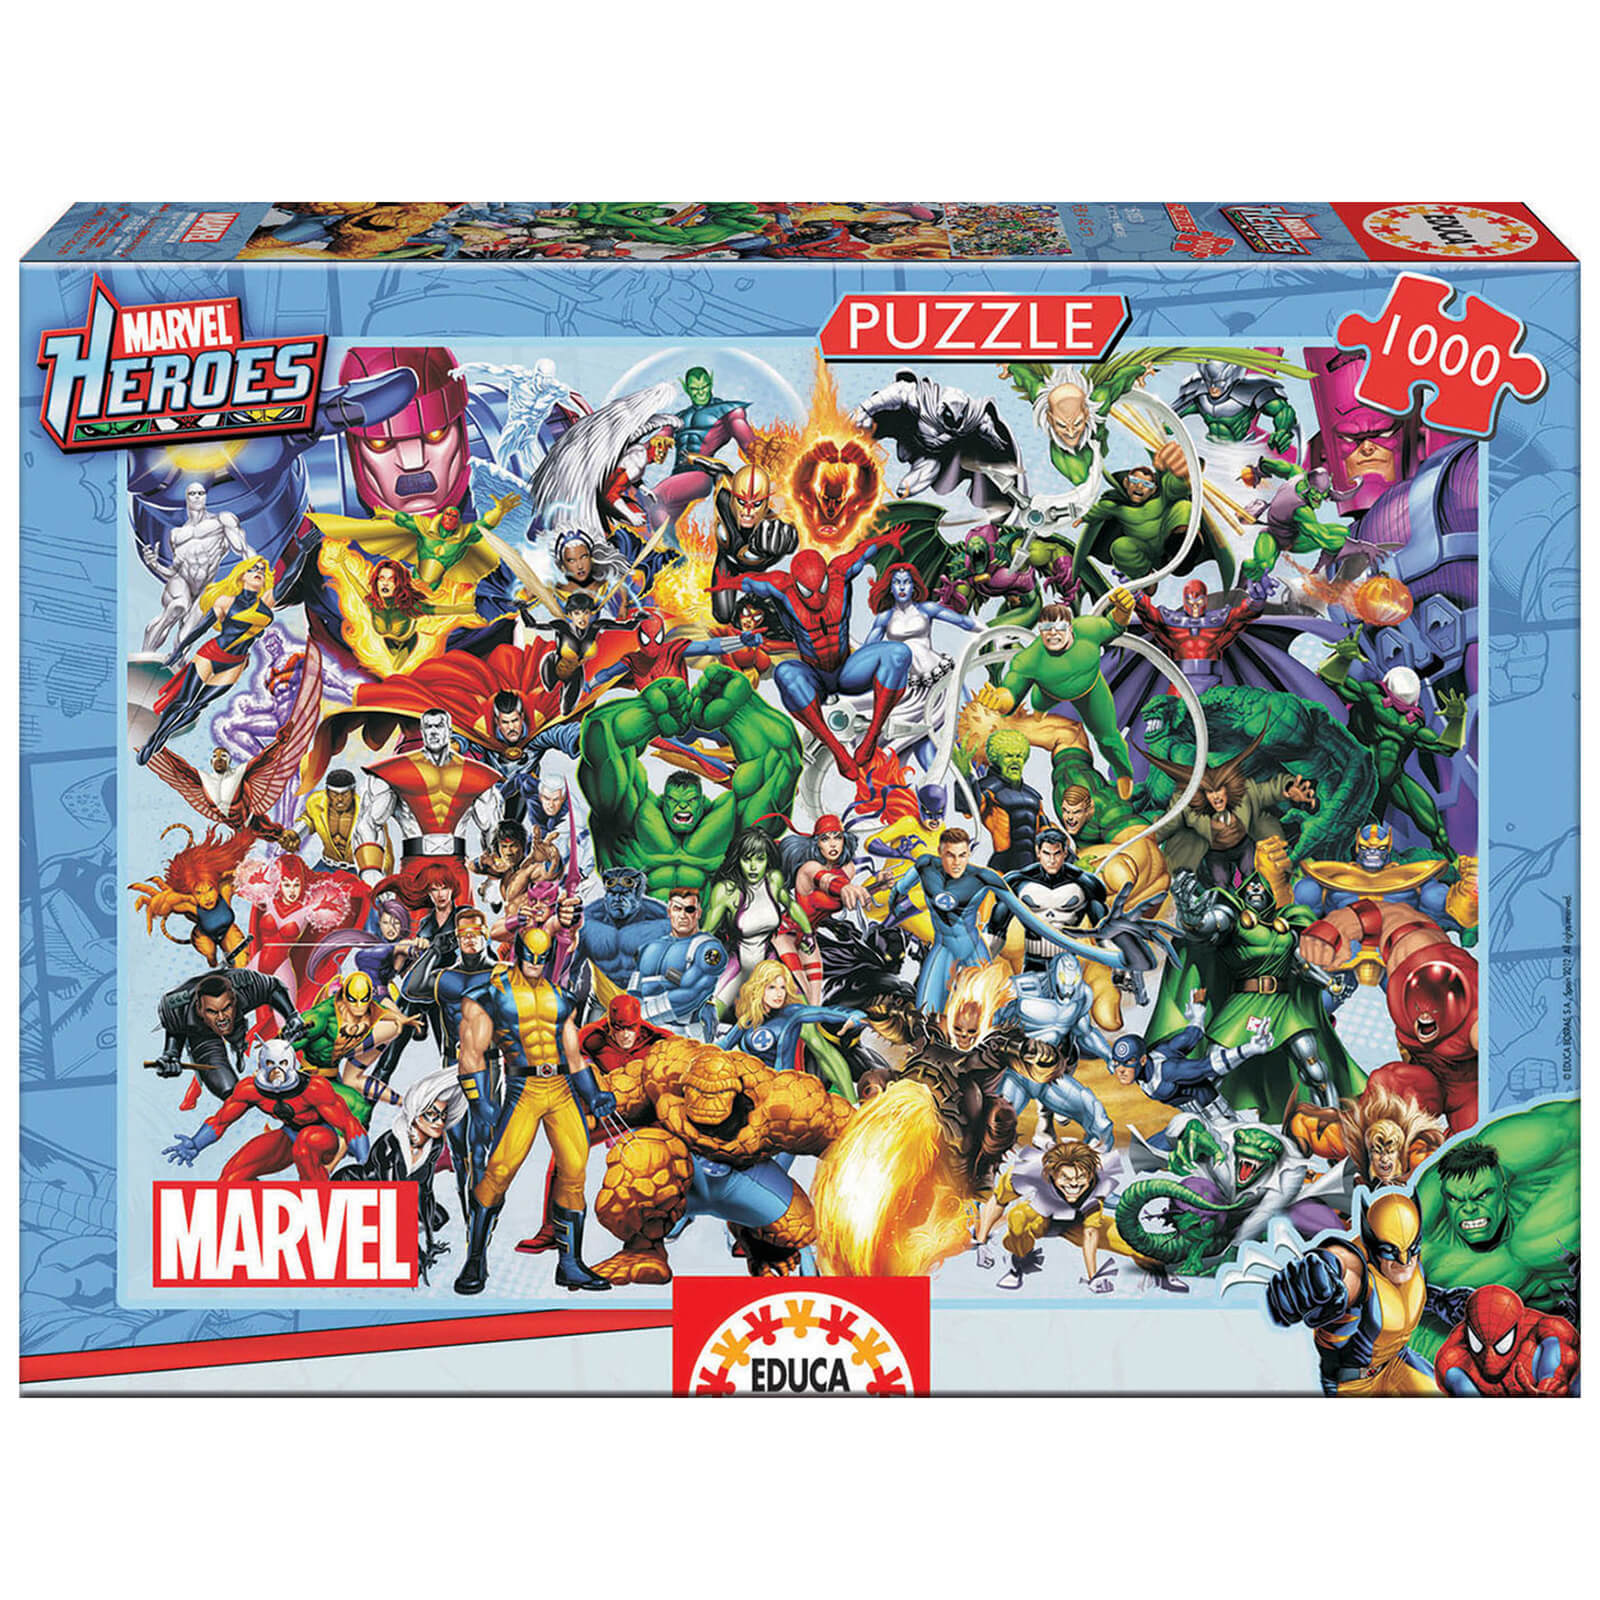 Marvel Heroes Collage Jigsaw Puzzle (1000 Pieces)